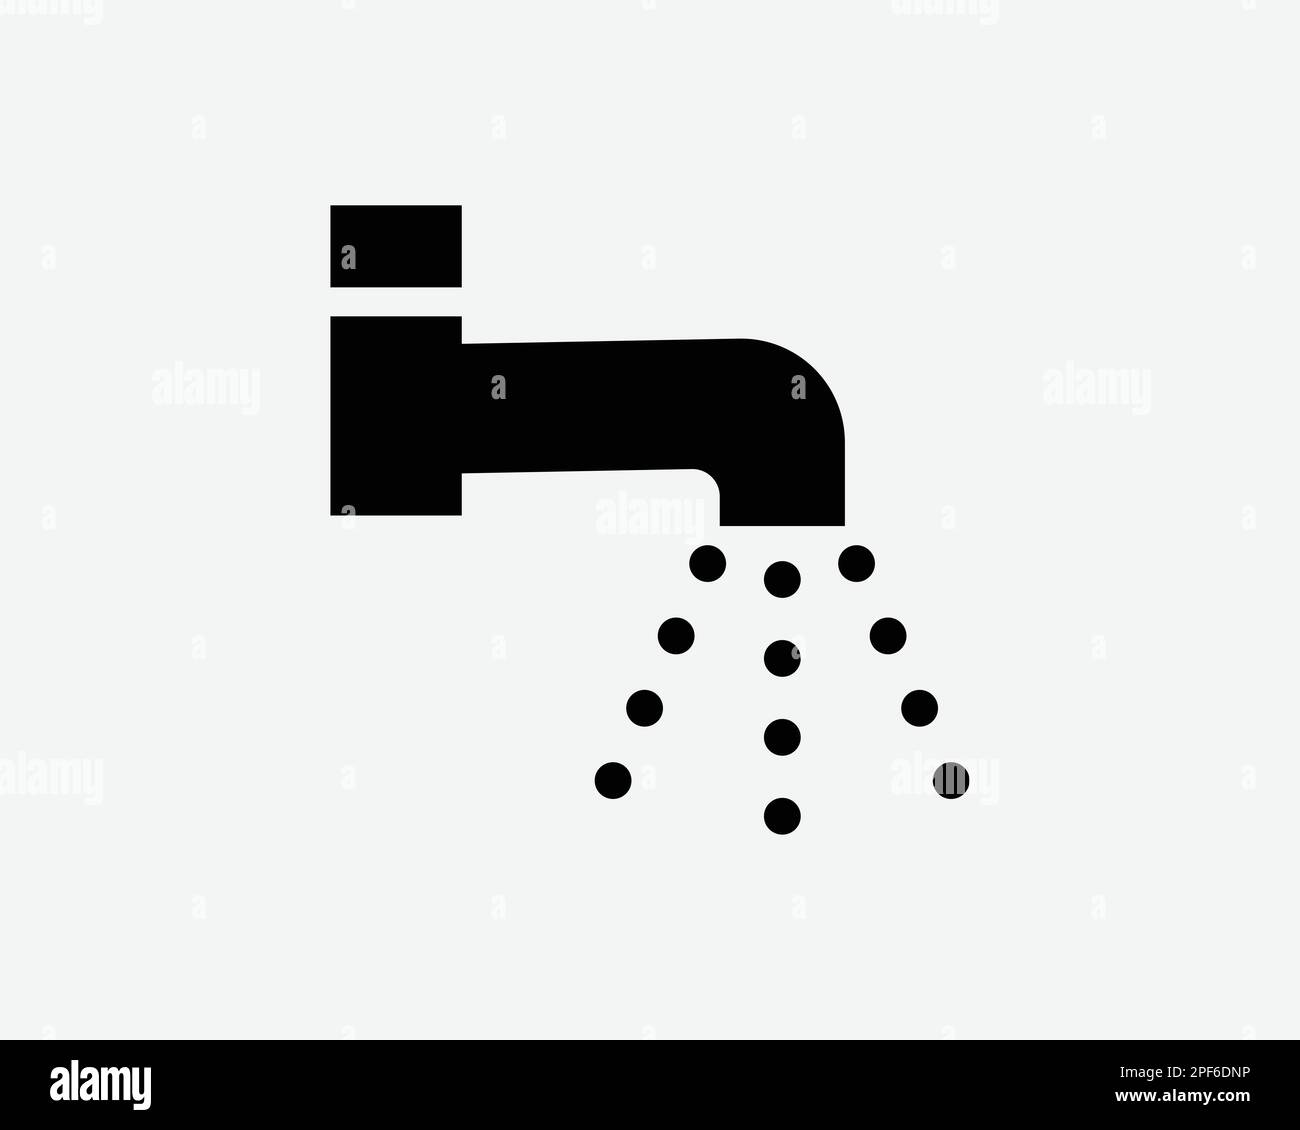 Water Tap Icon Pipe Faucet Spray Bathroom Restroom Kitchen Black White Silhouette Symbol Sign Graphic Clipart Artwork Illustration Pictogram Vector Stock Vector